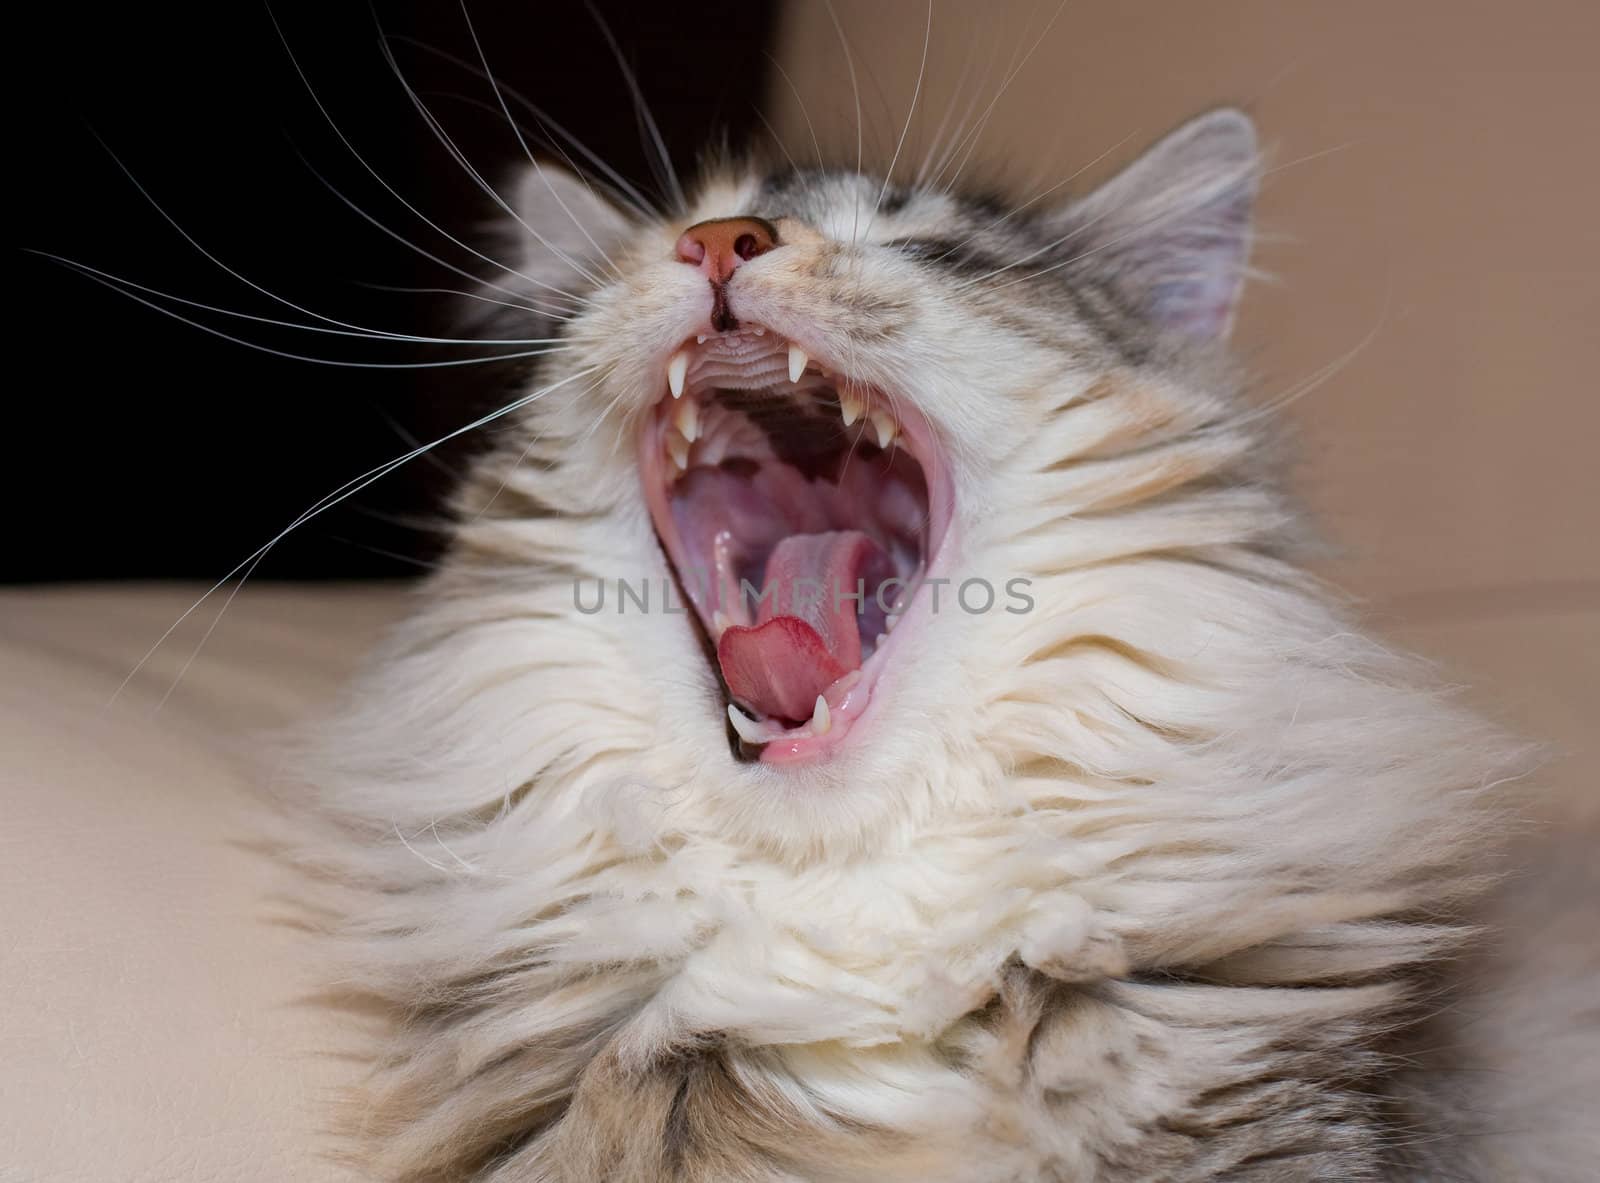 Yawning cat by desant7474